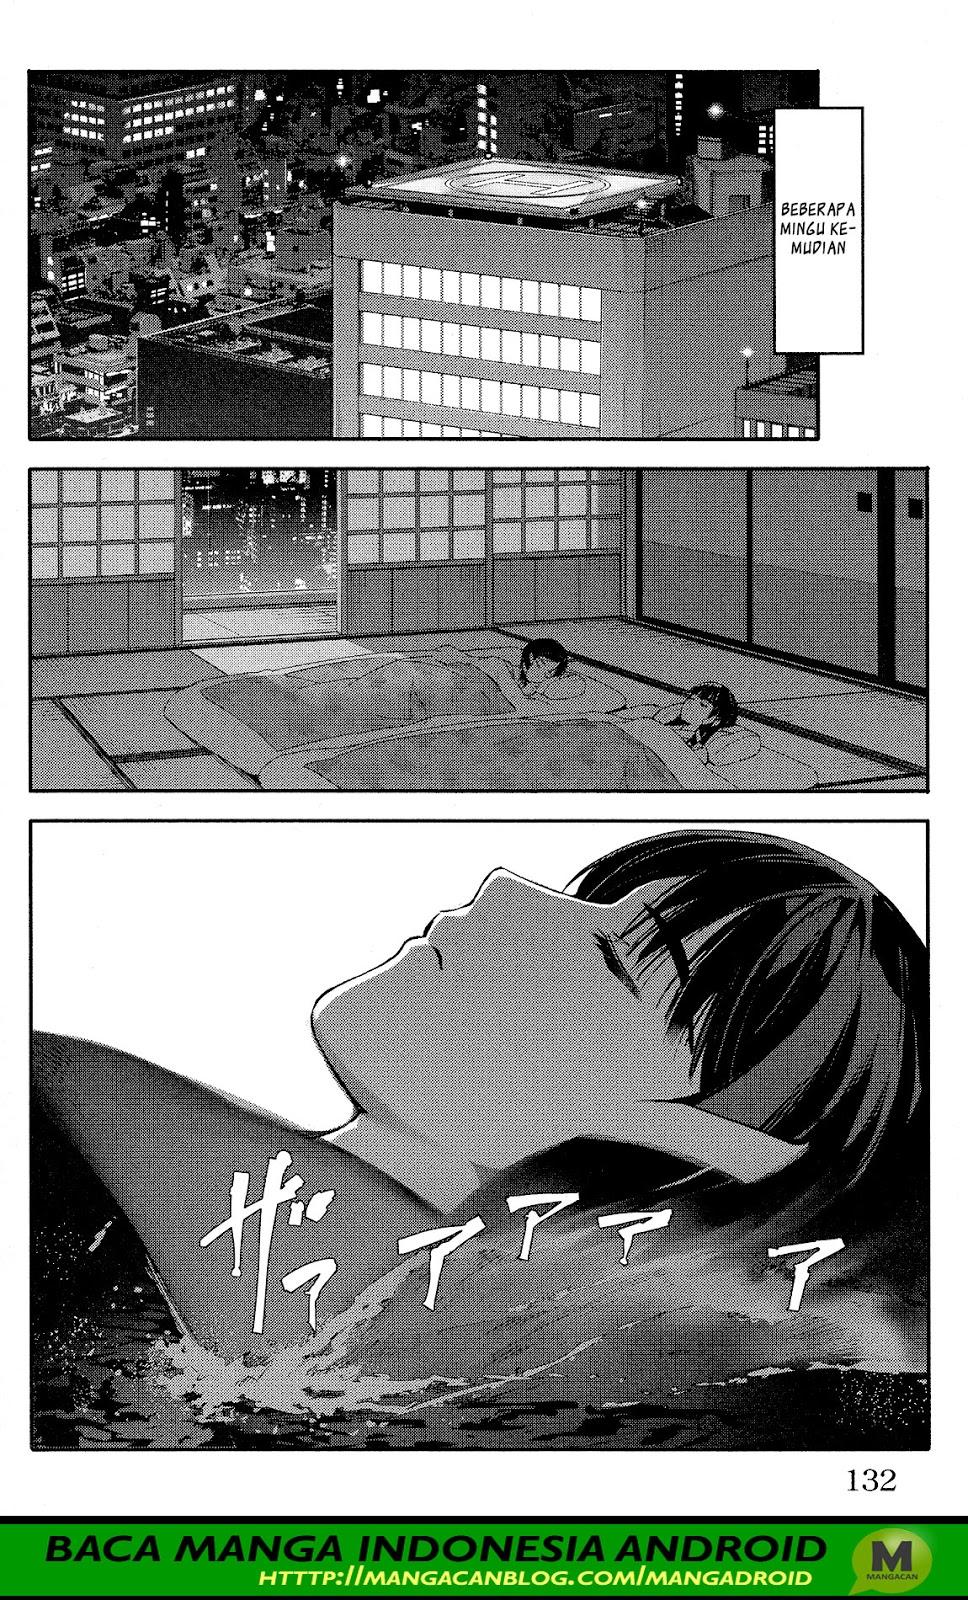 Darwin’s Game Chapter 59